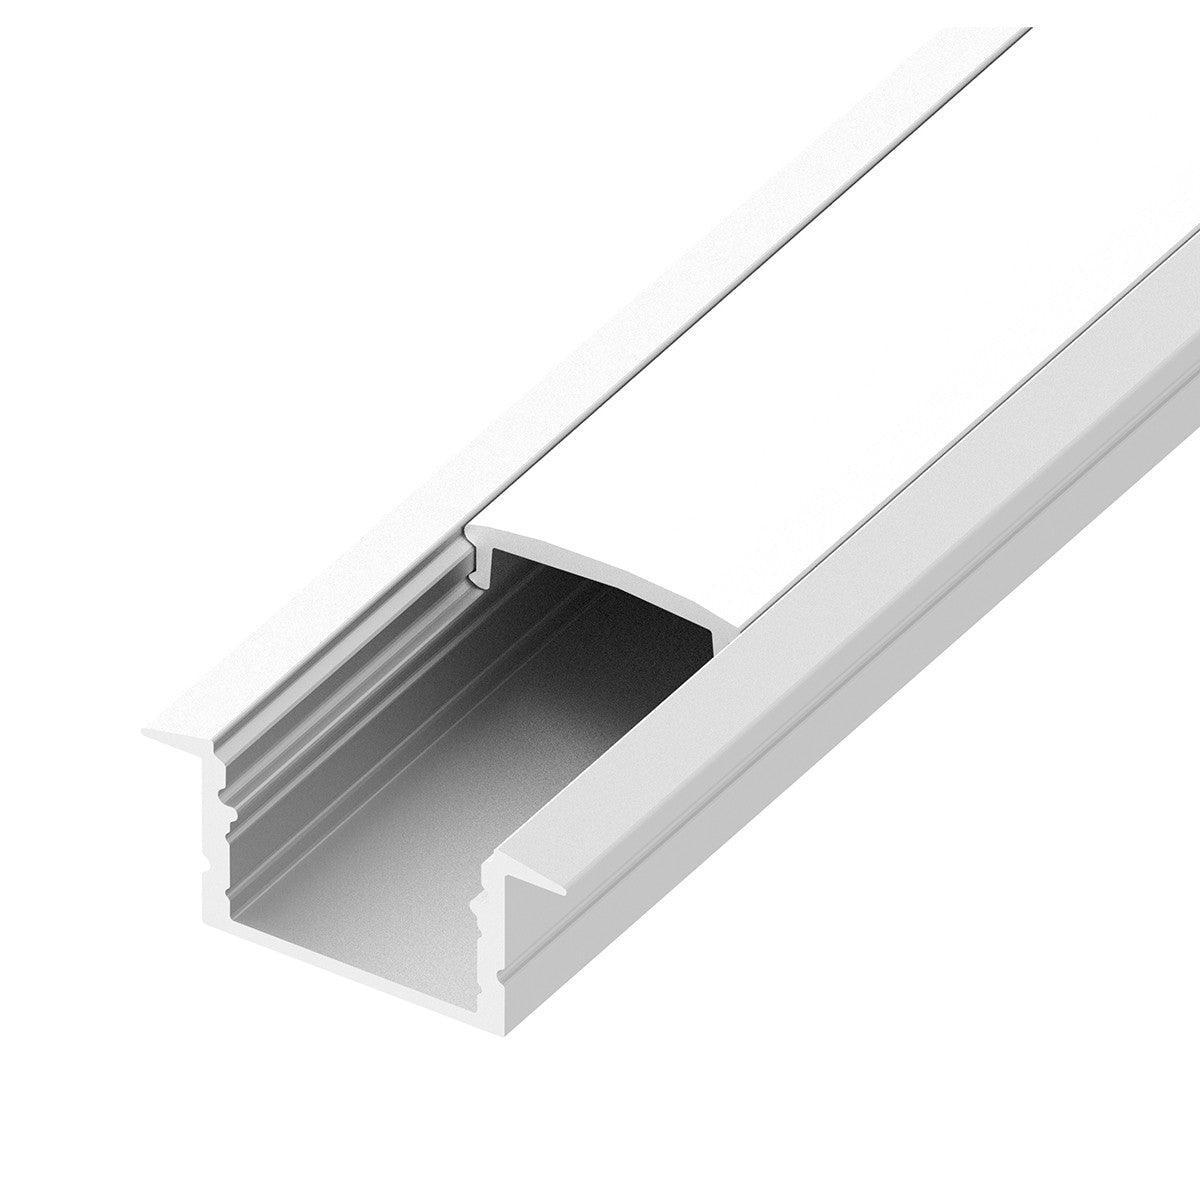 48in. Chromapath Bundle, Recessed Aluminum Channel for Tape lights Up To 12mm, Frosted cover - Bees Lighting